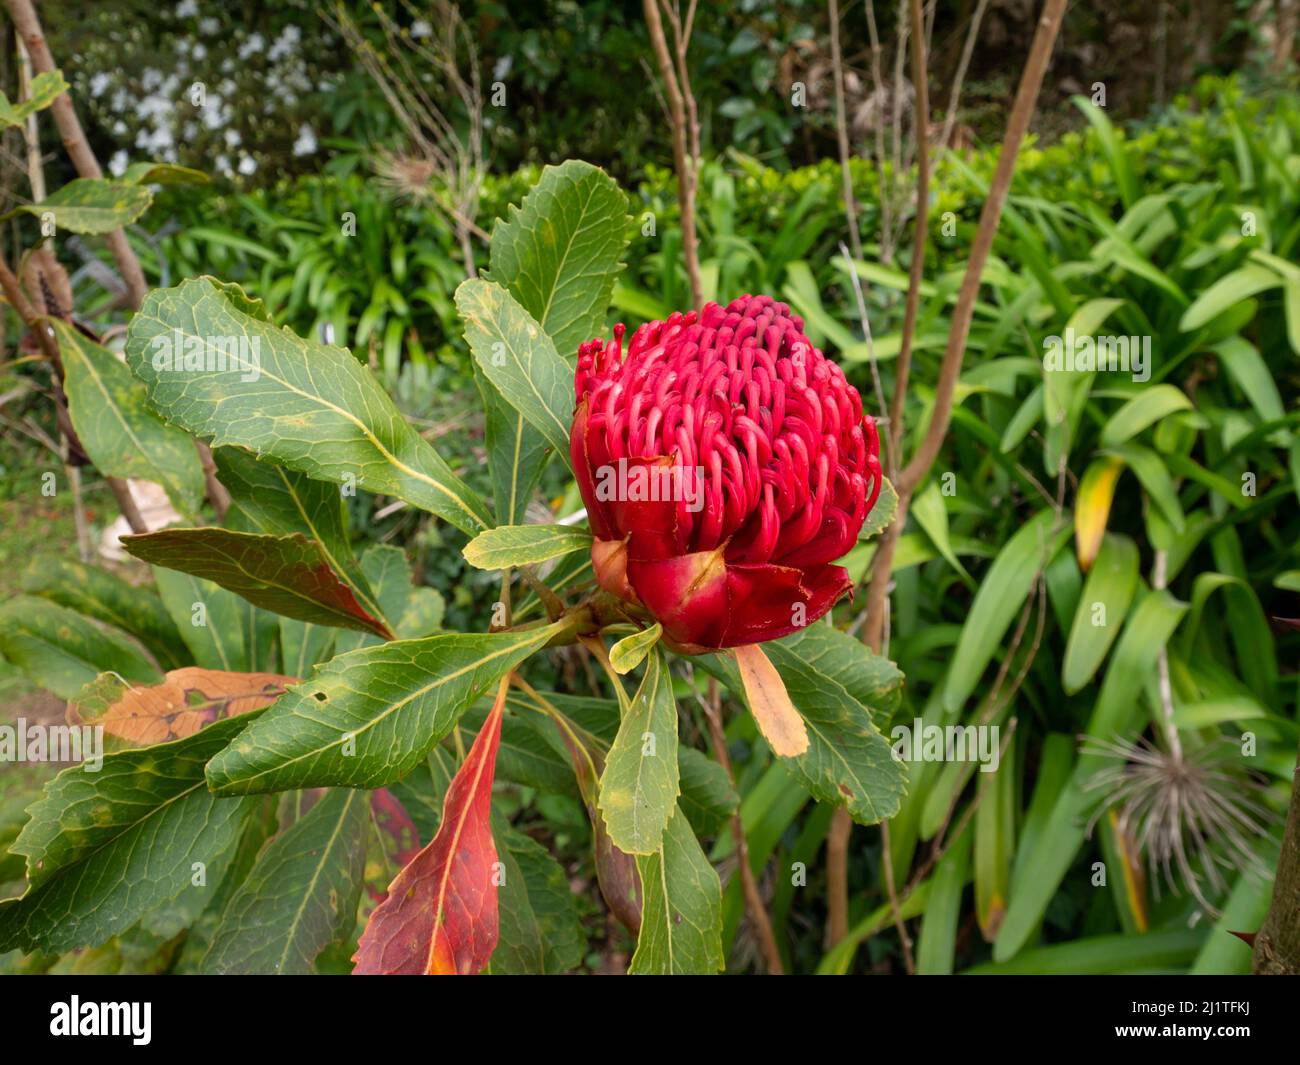 Telopea speciosissima the New South Wales waratah or simply waratah plant with red flowerhead. Stock Photo